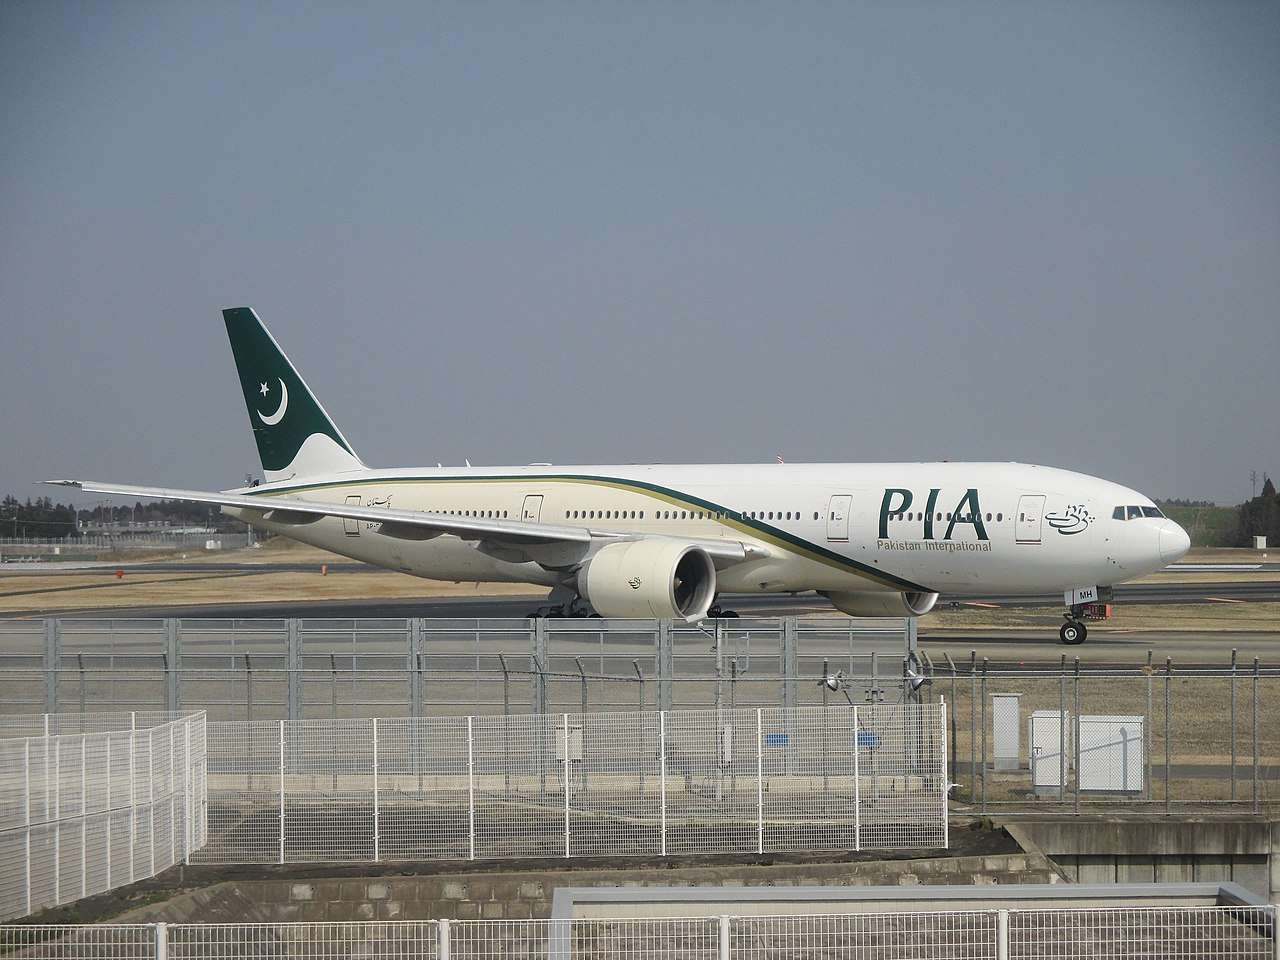 A Pakistan International Airlines (PIA) Boeing 777-200ER on the tarmac.